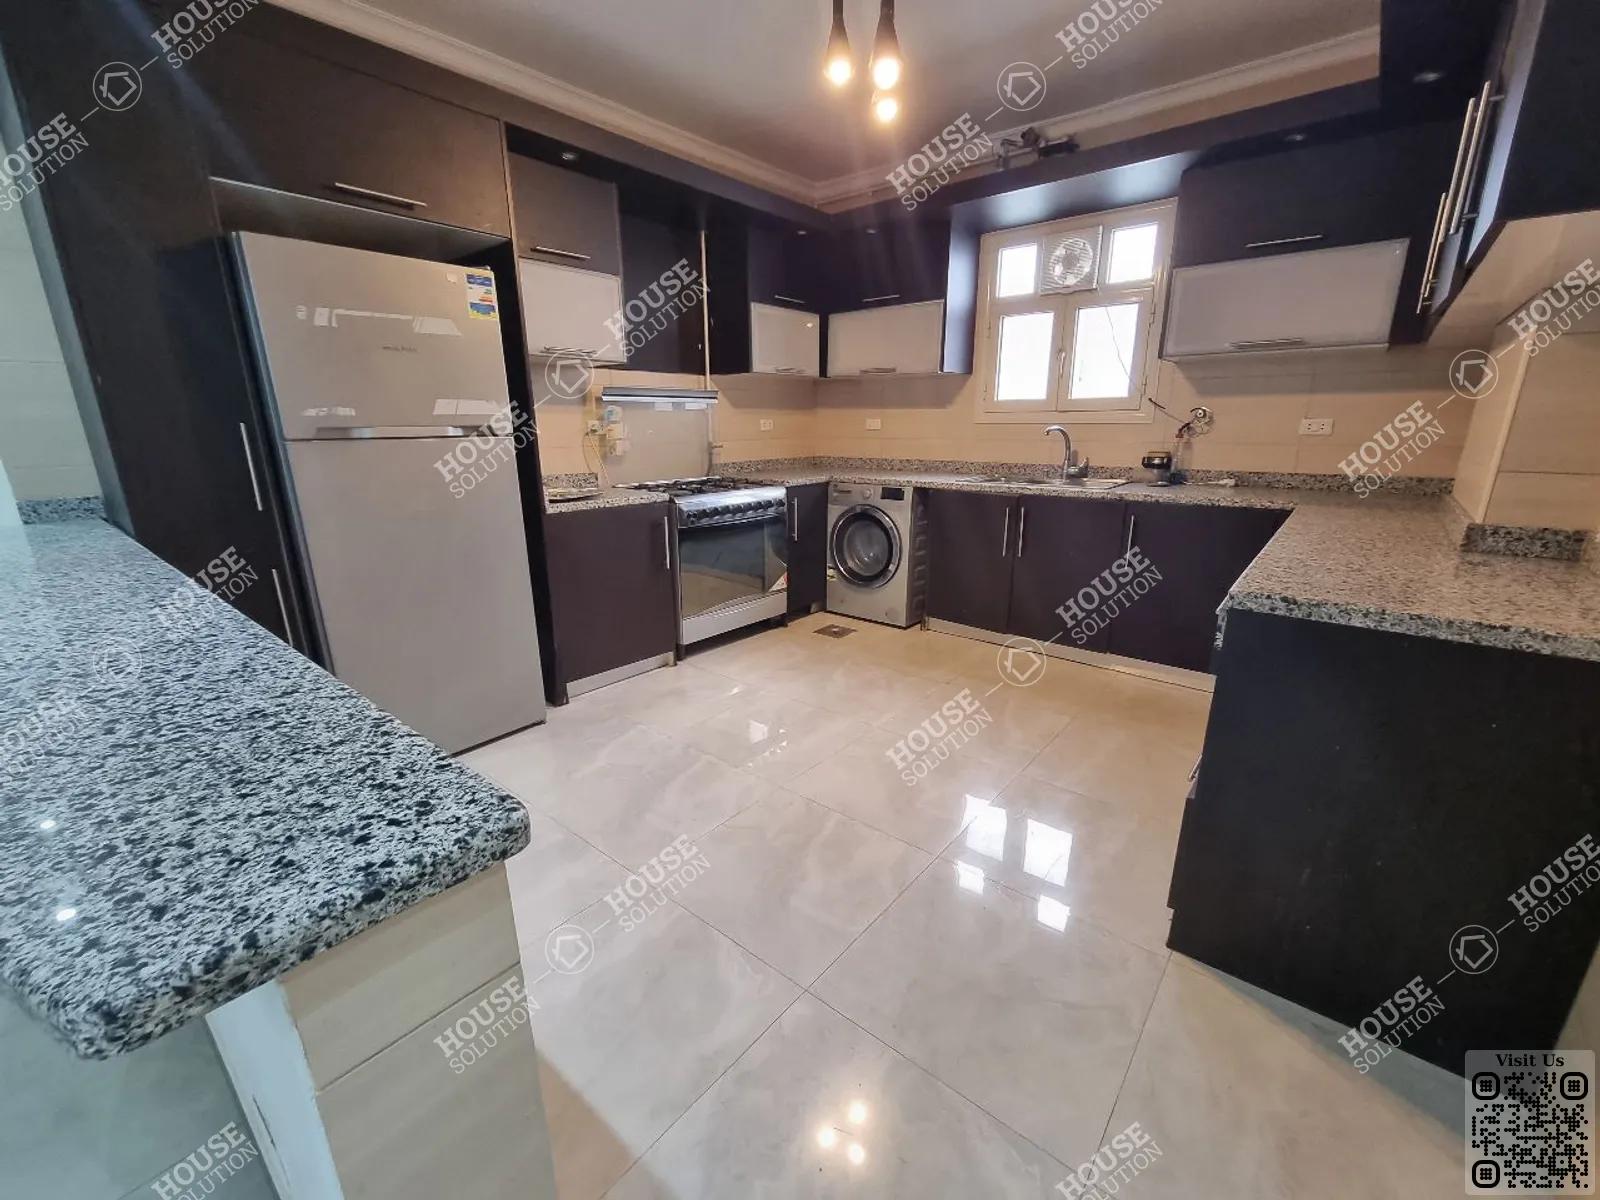 KITCHEN  @ Apartments For Rent In Maadi Maadi Sarayat Area: 220 m² consists of 3 Bedrooms 3 Bathrooms Modern furnished 5 stars #4539-1